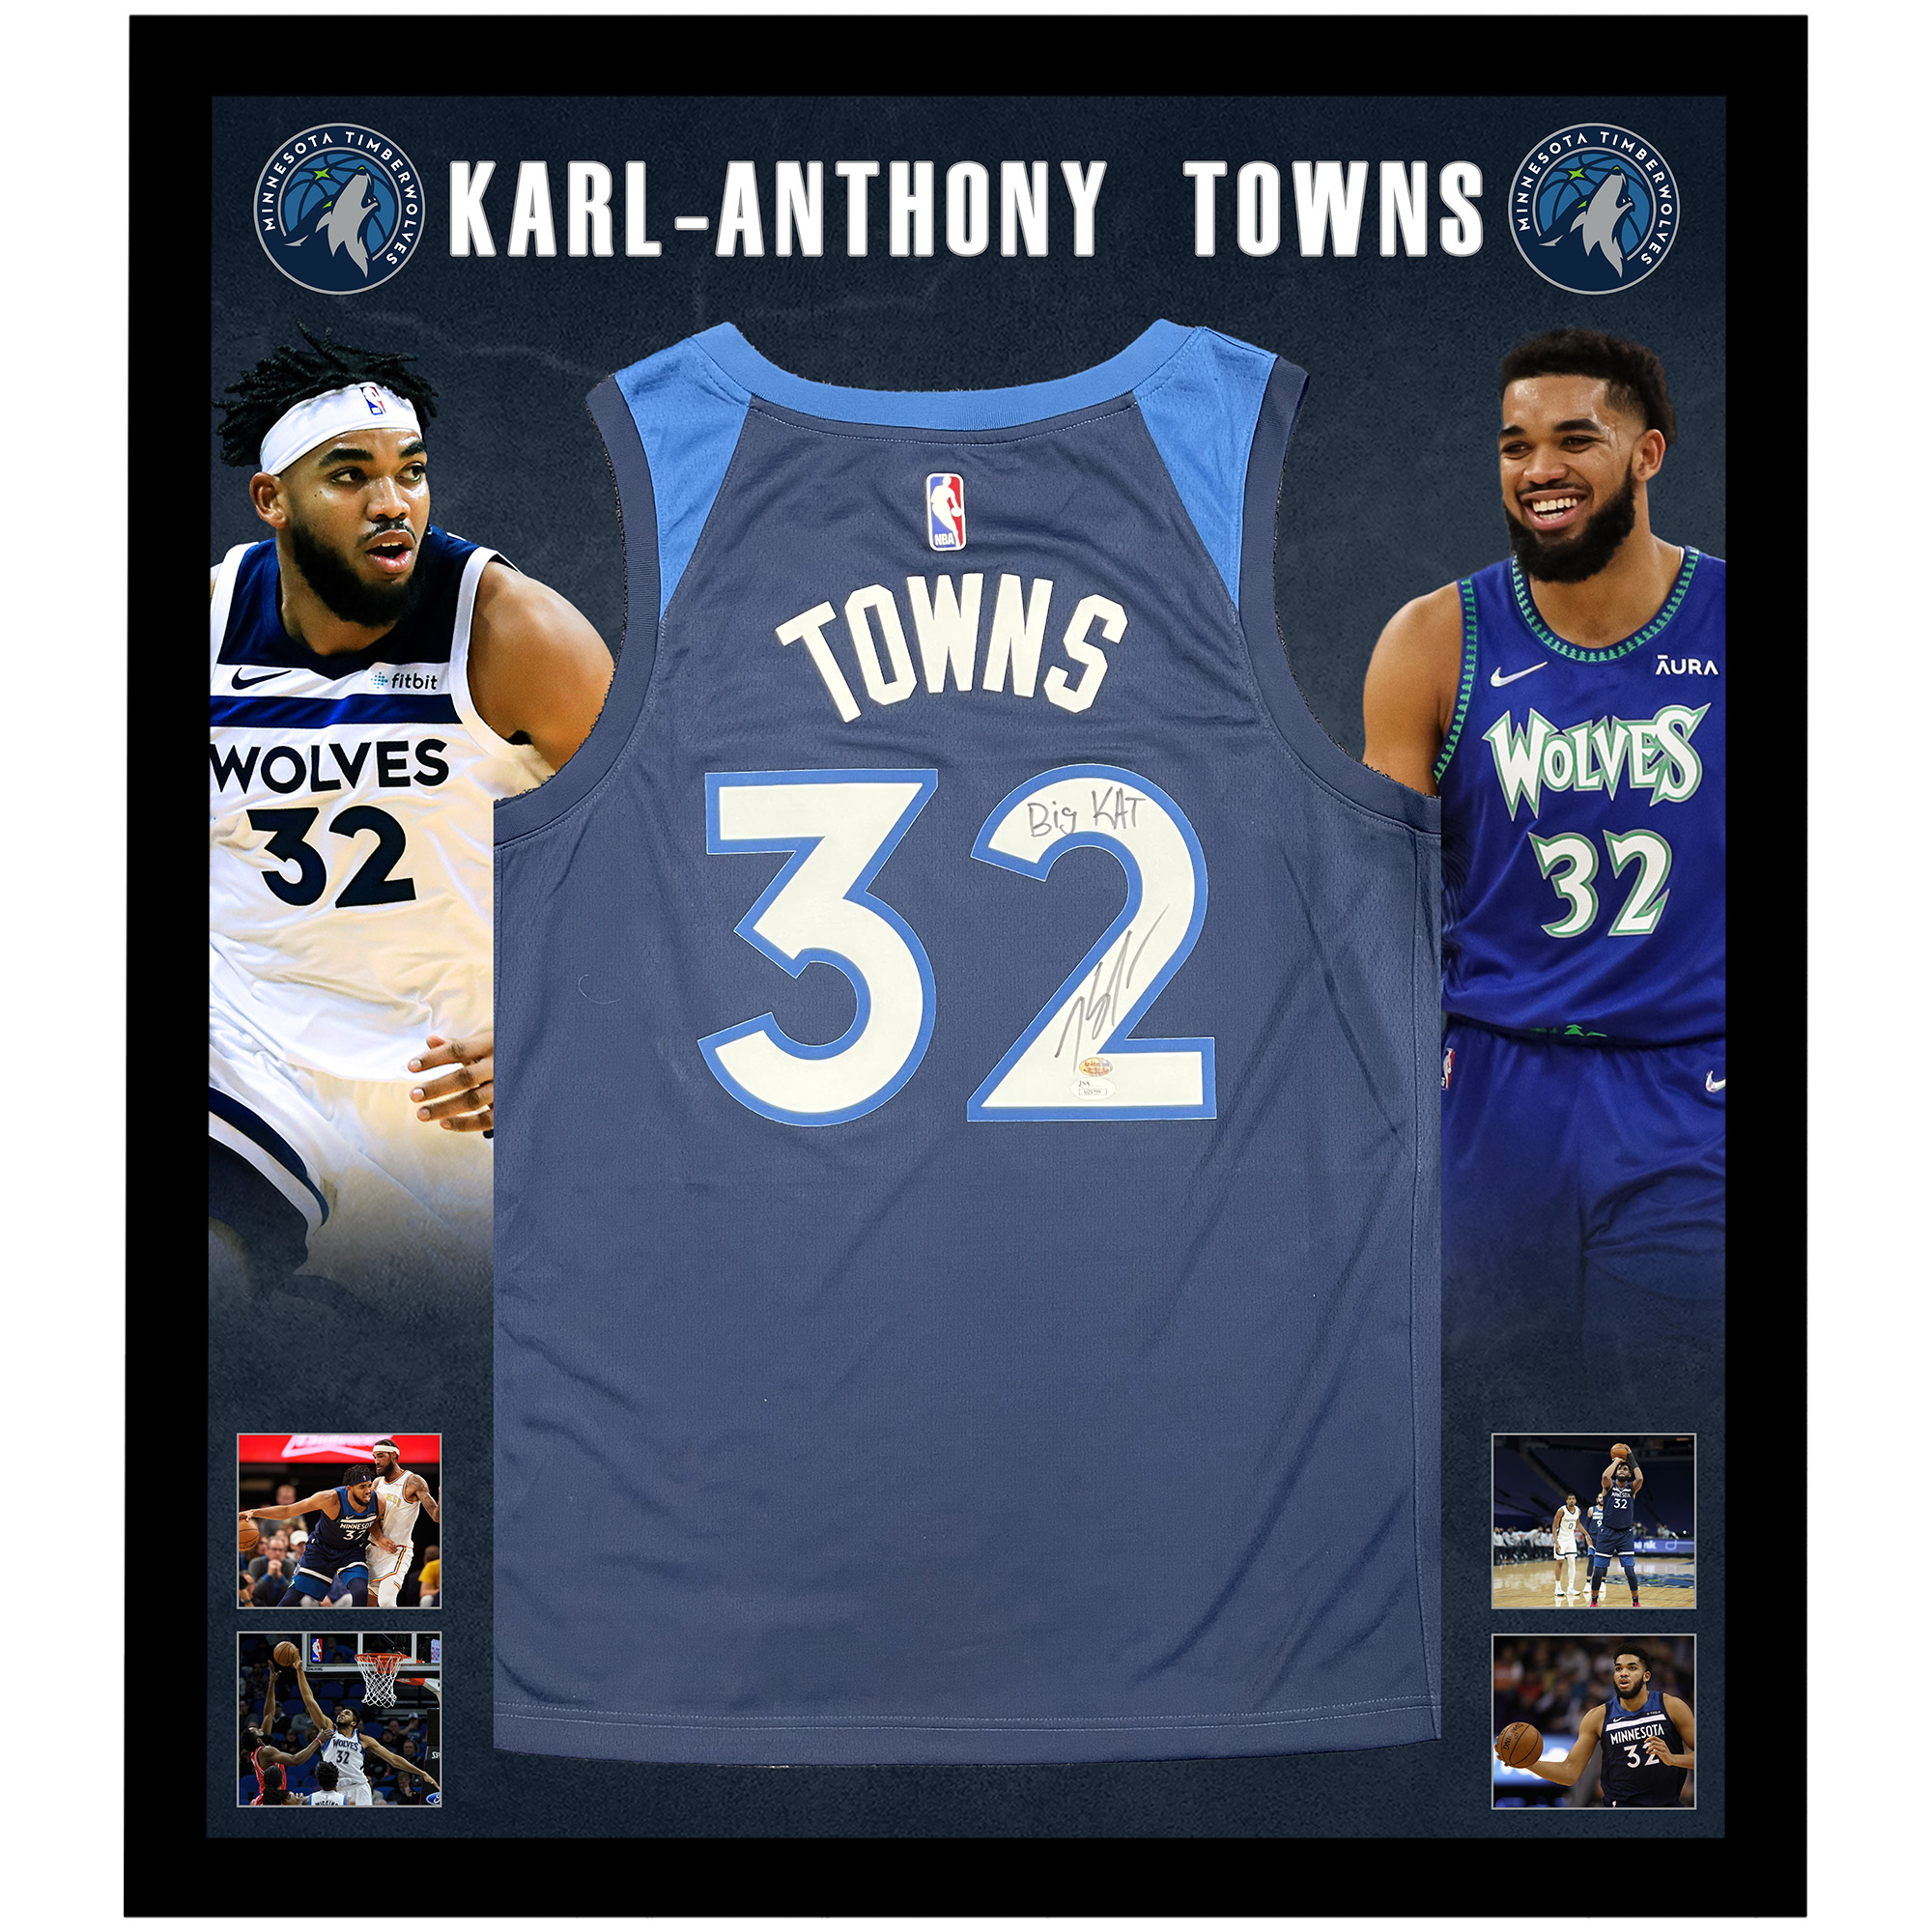 Karl-Anthony Towns Timberwolves Signed Autographed Black #32